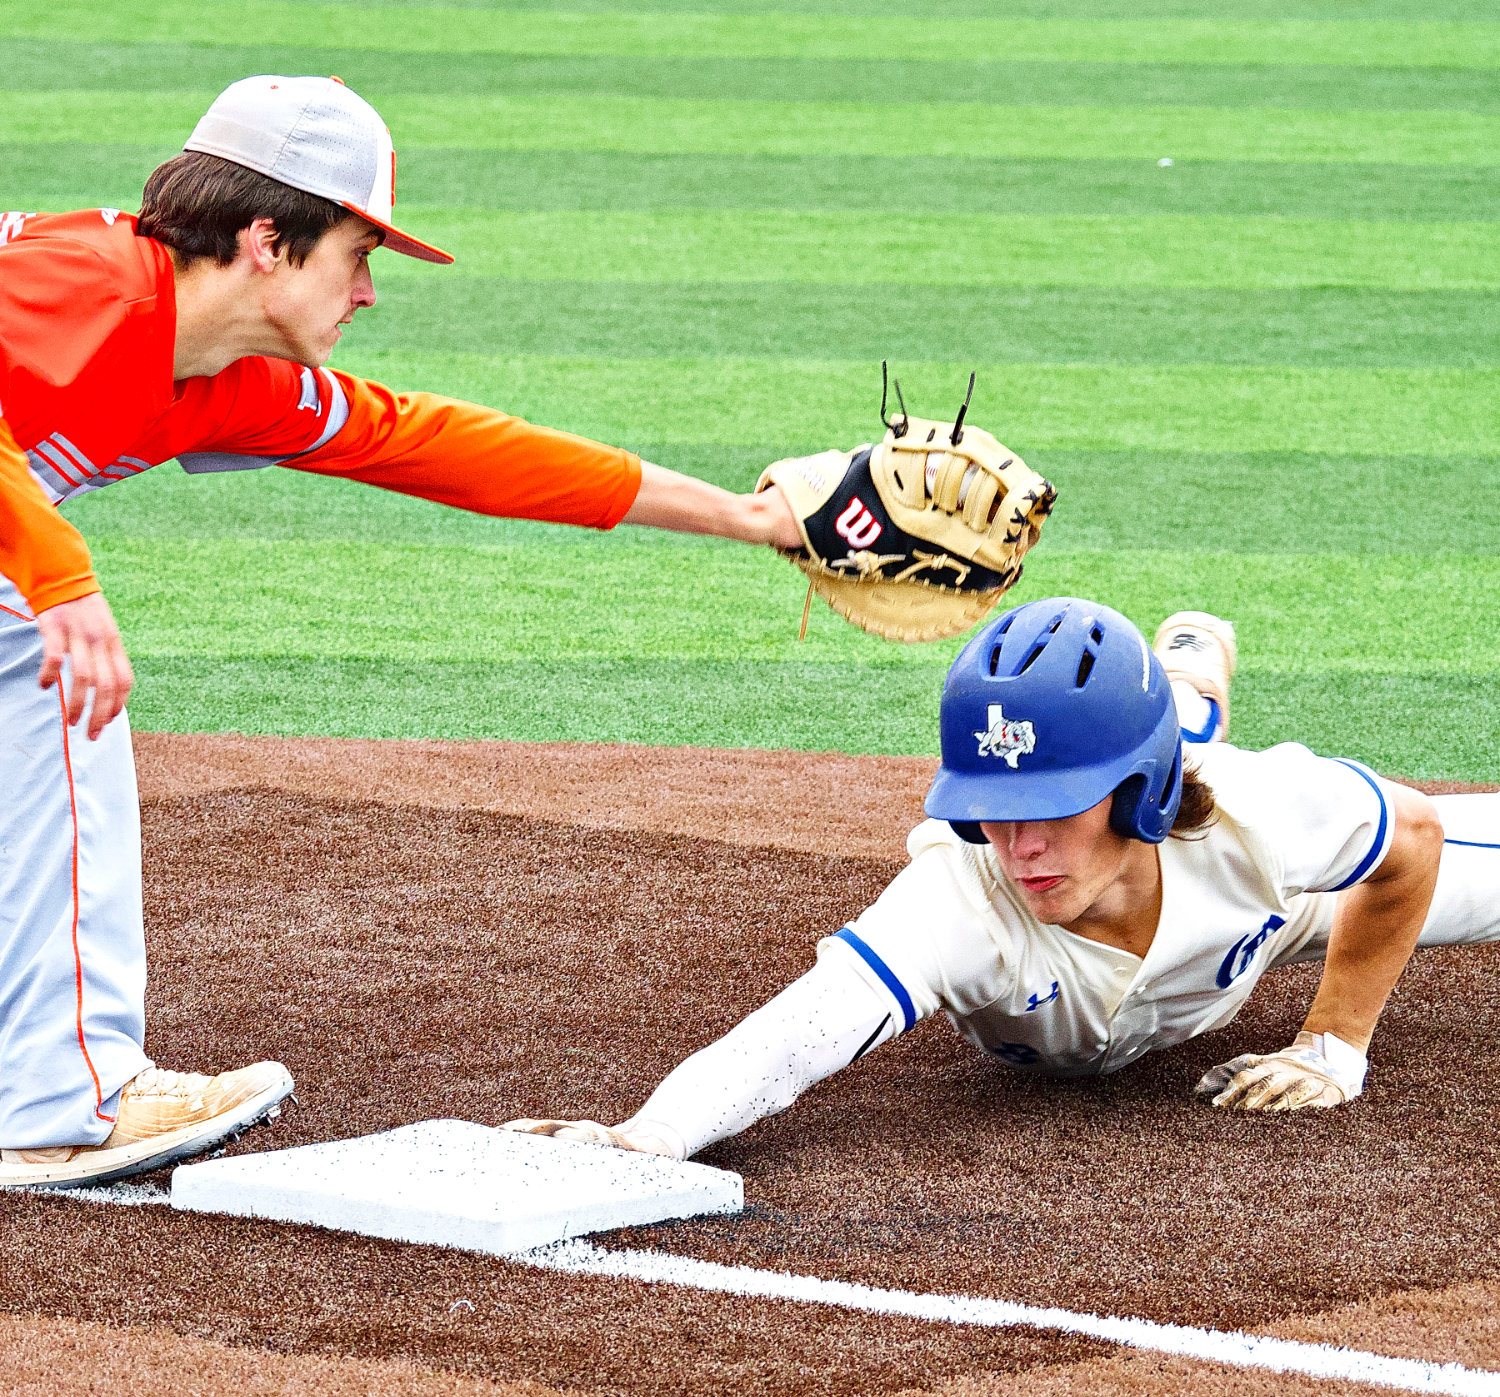 Solid spring showers forced Mineola and Quitman to relocate their matchup to the artificial turf of Grand Saline's baseball facility April 16. Here, Quitman's Mason Reynolds slides under the tag of Mineola first baseman James Clower. [see more sports from throughout the year]